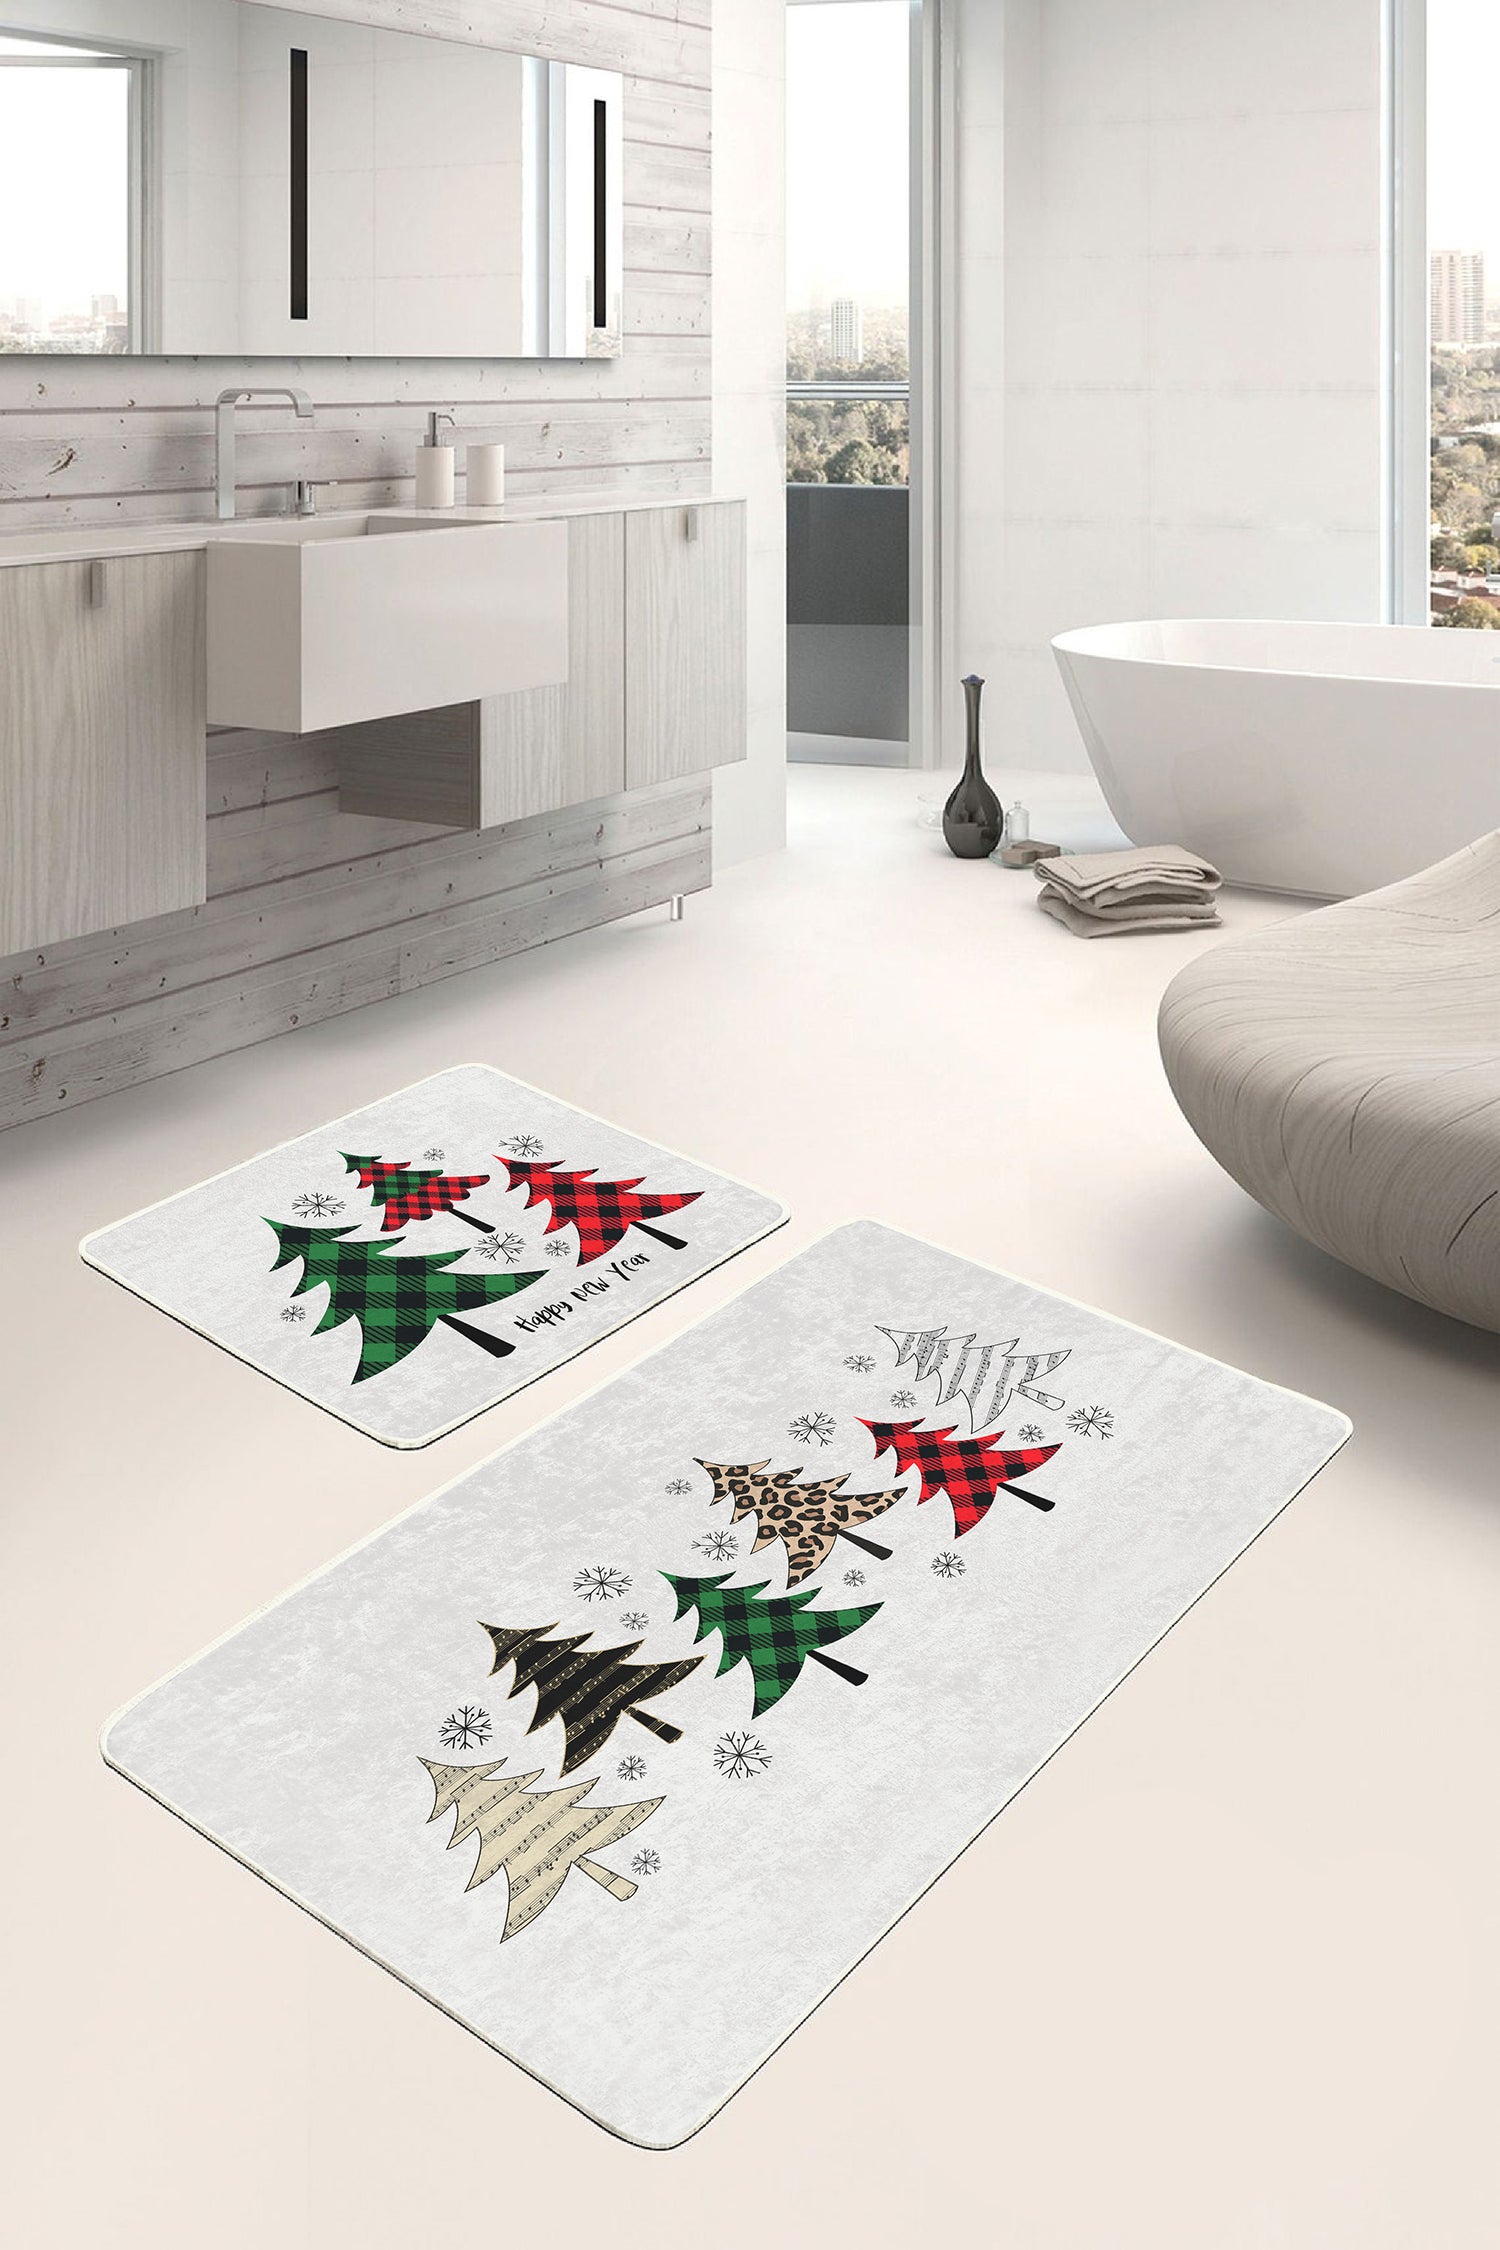 Decorative Bath Mat Set with a Charming Array of Christmas Tree Patterns